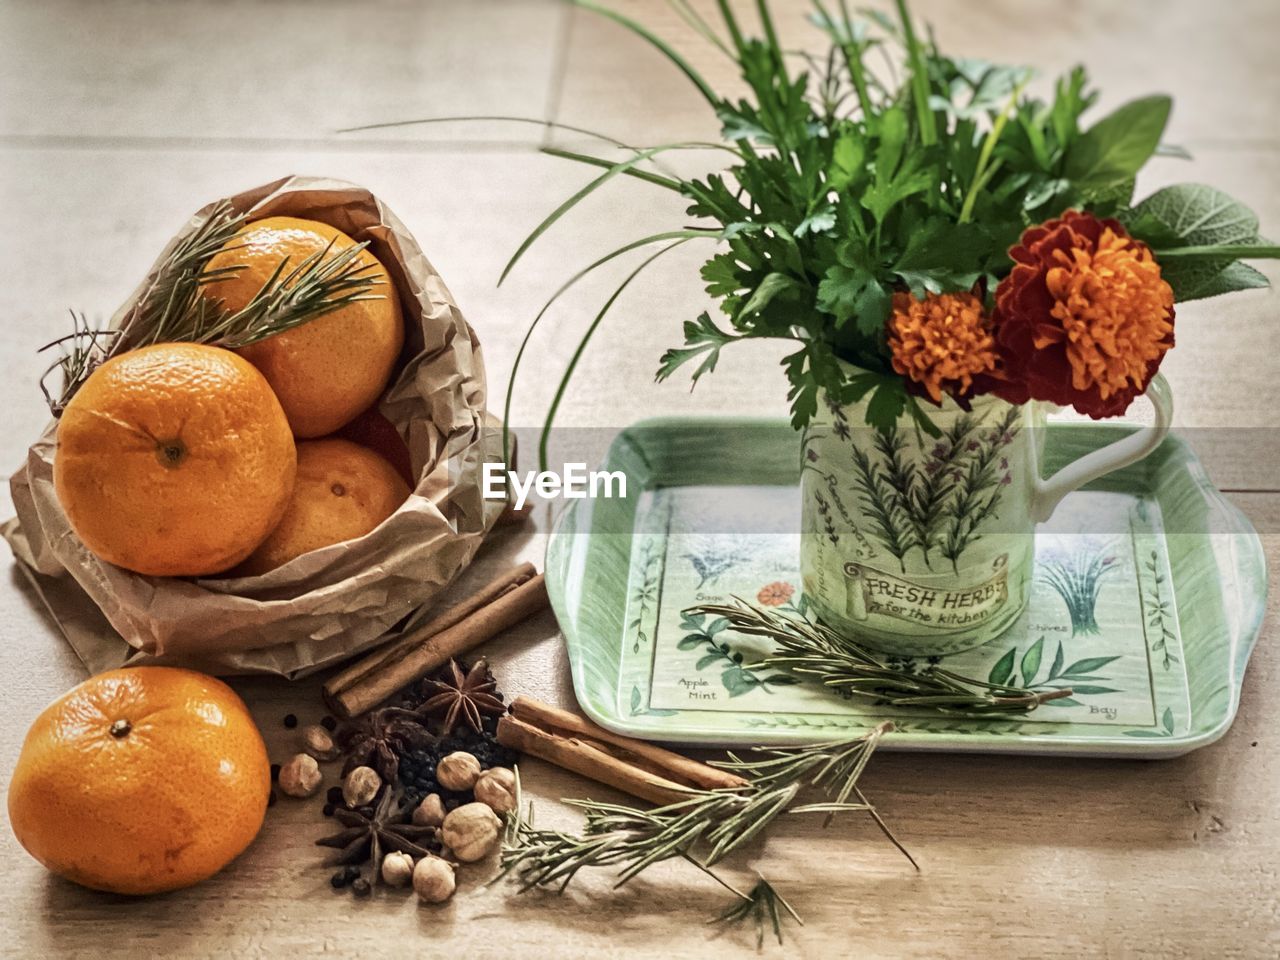 food and drink, food, healthy eating, plant, freshness, wellbeing, still life photography, container, still life, indoors, no people, herb, nature, fruit, table, ingredient, vegetable, painting, basket, plant part, spice, leaf, orange color, rustic, wood, studio shot, rosemary, organic, citrus fruit, flower, egg, produce, floristry